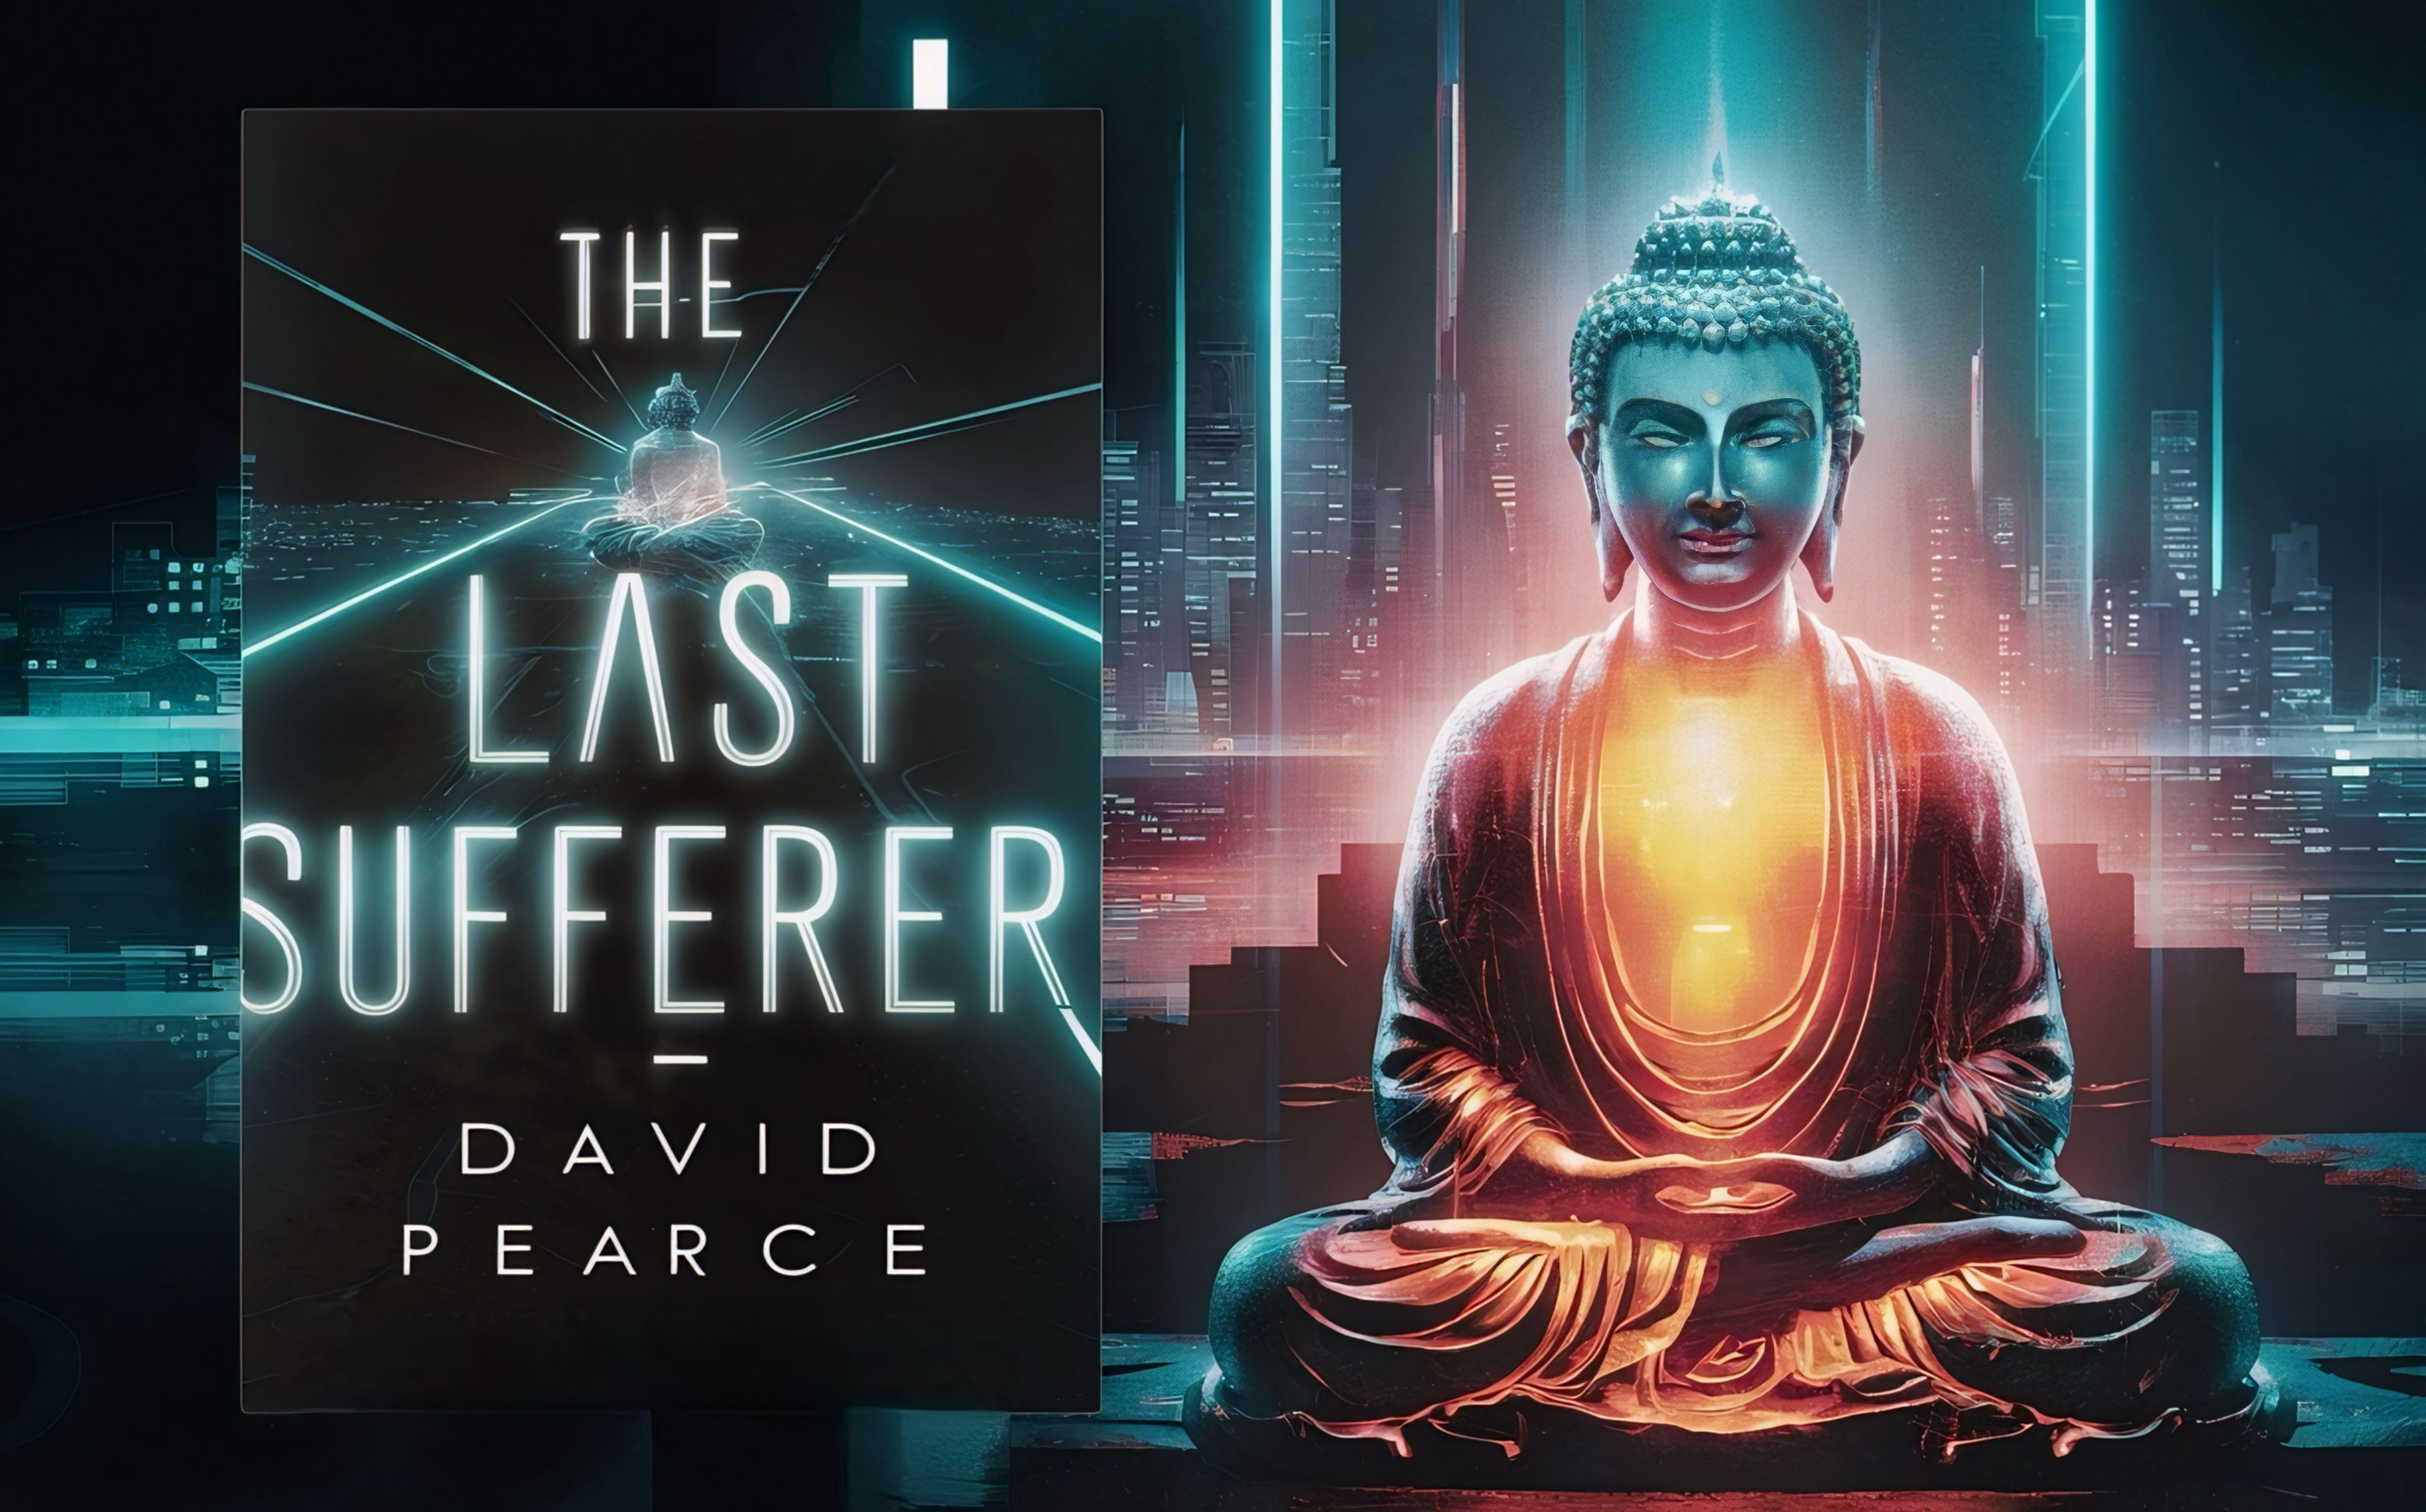 The Last Sufferer by David Pearce